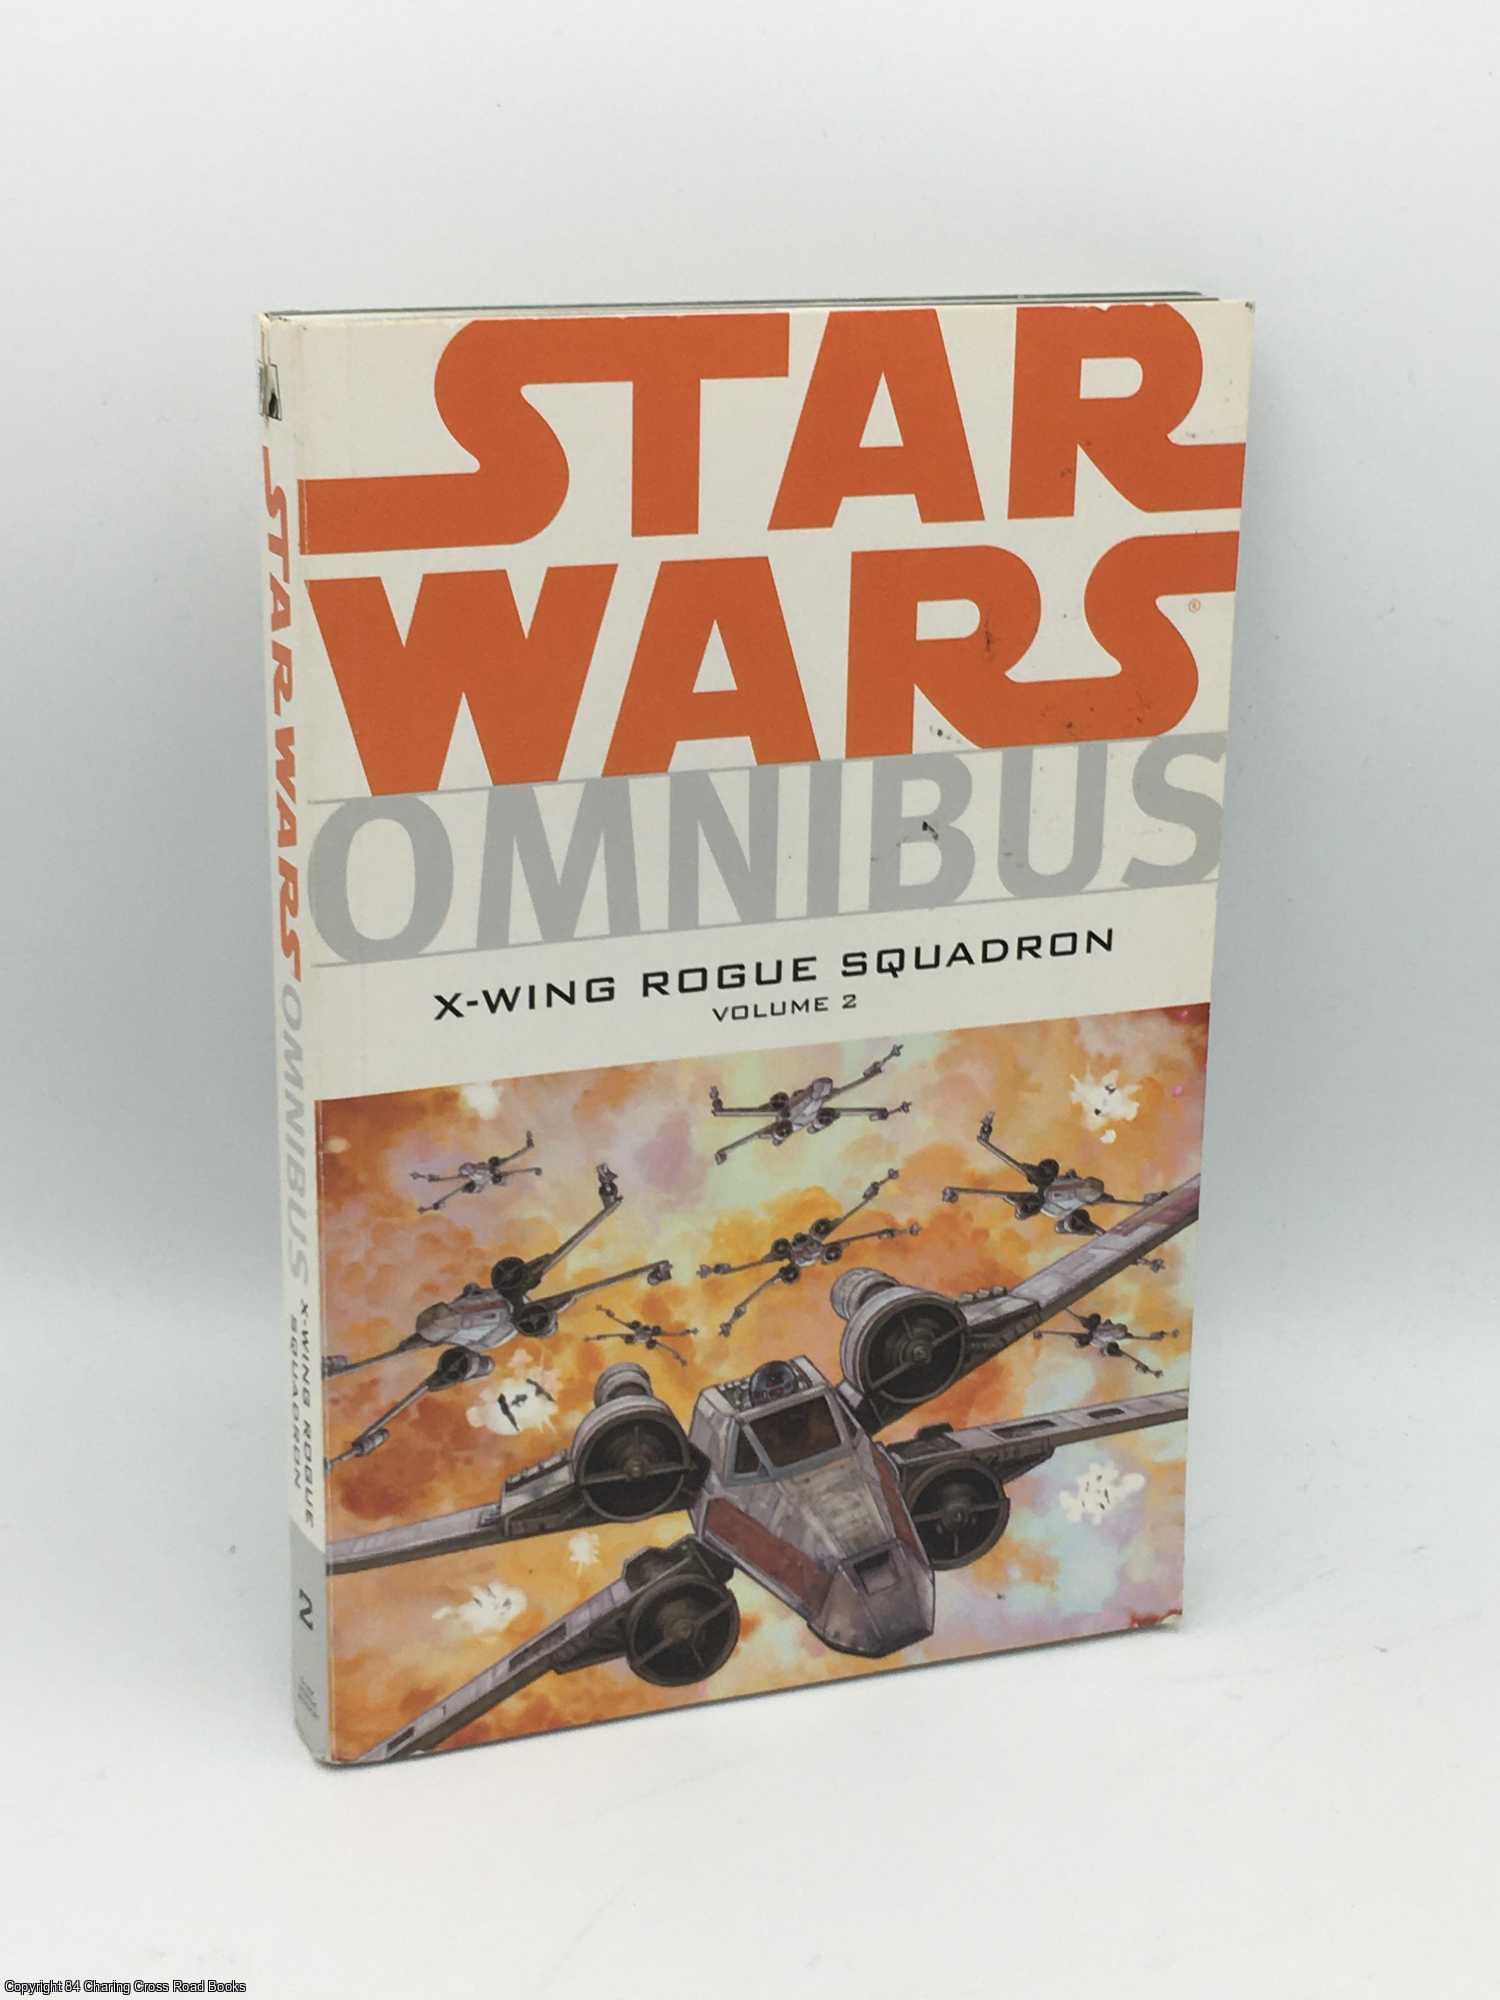 Writers, Various - Star Wars v. 2: X-Wing Rogue Squadron Omnibus